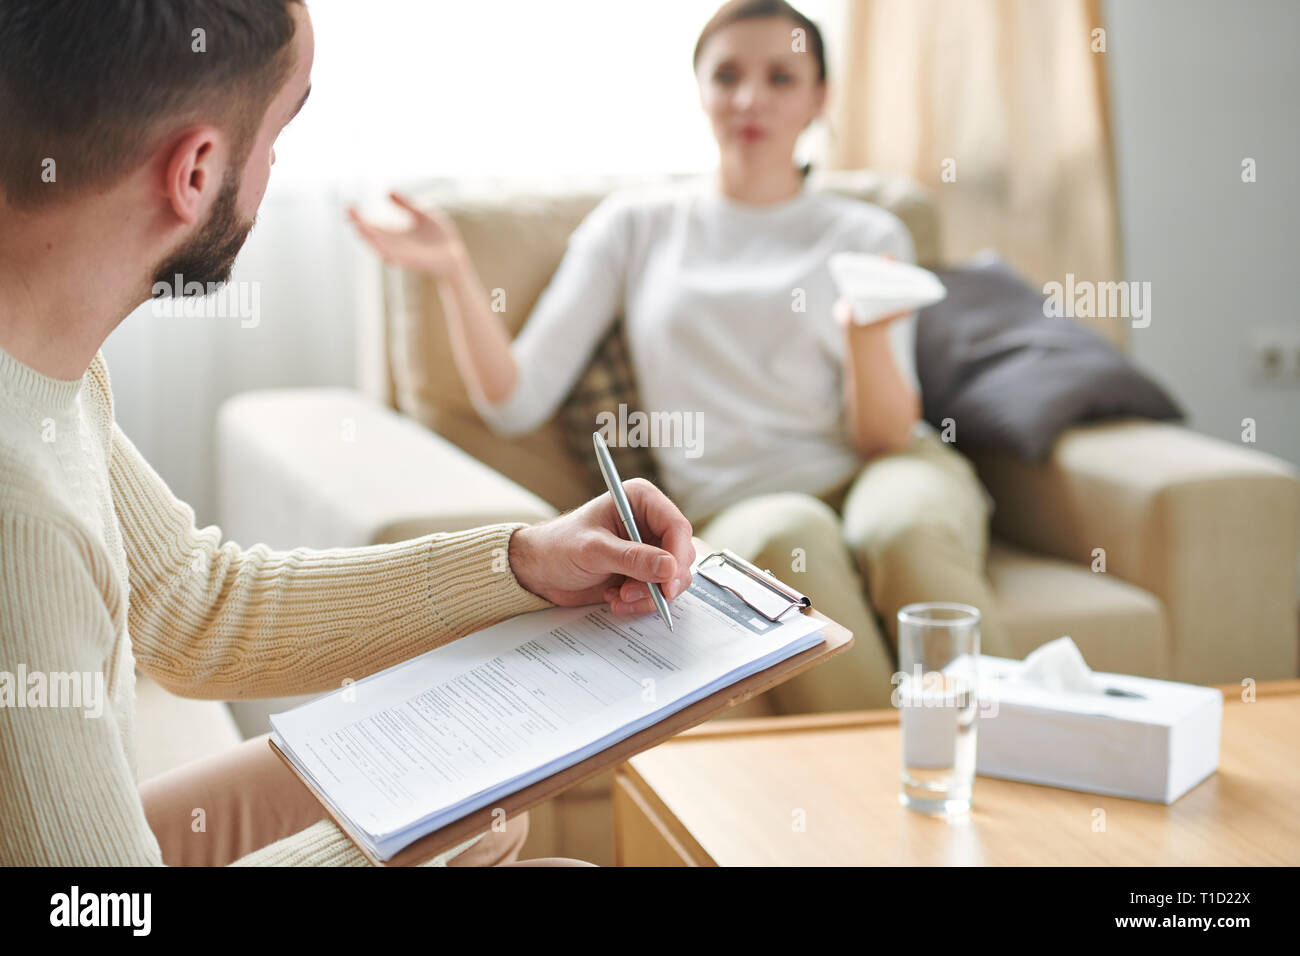 Counselor with document Stock Photo